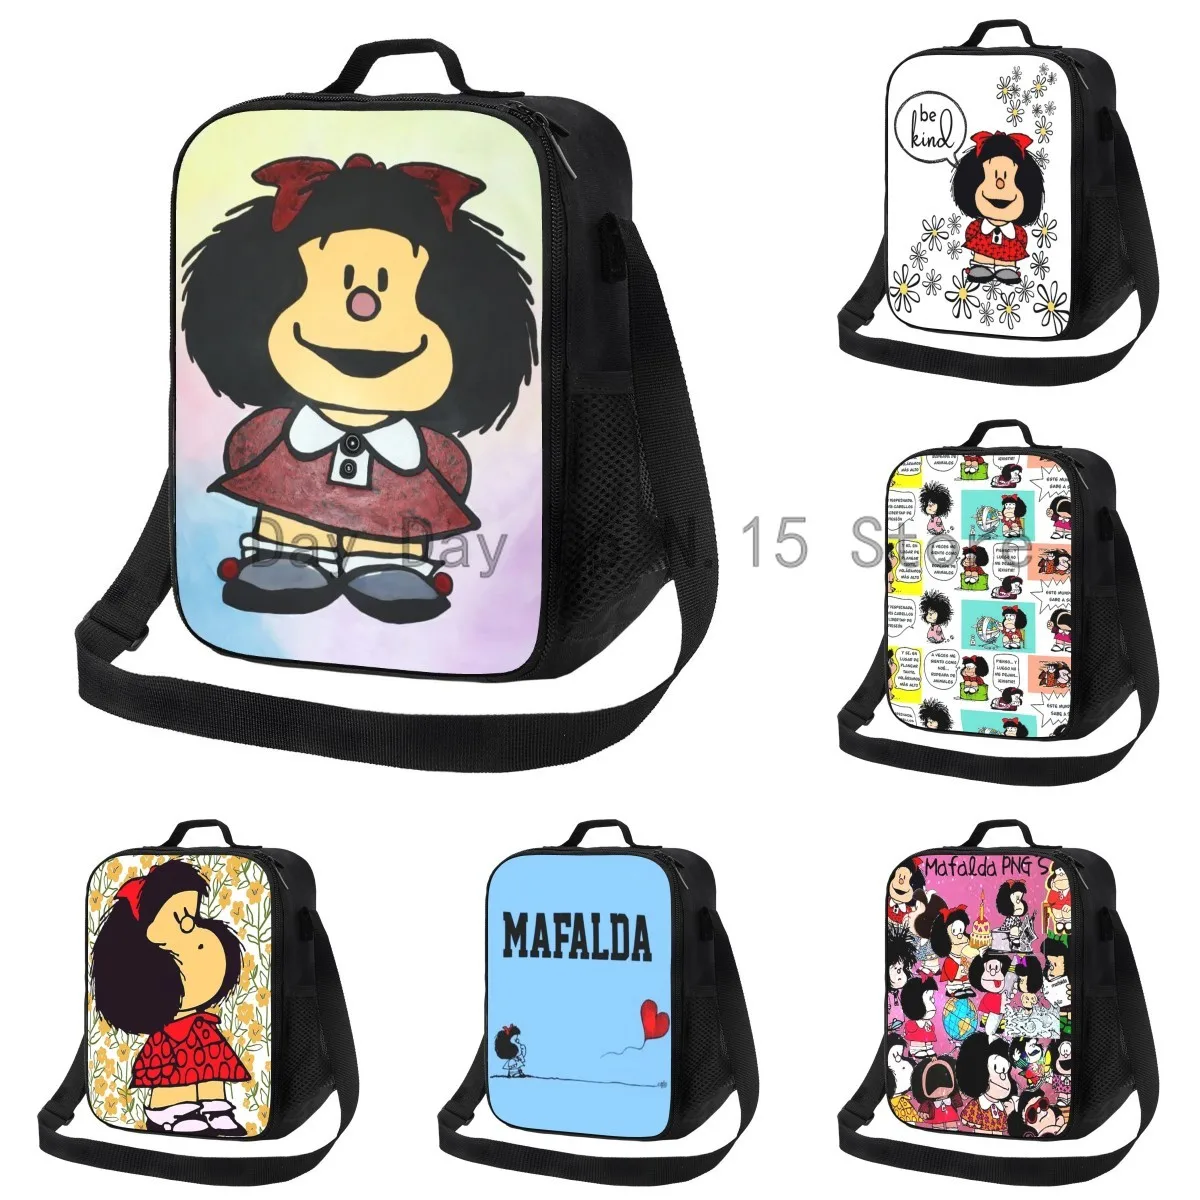 Cartoon Manga Mafalda Portable Lunch Box Women Multifunction Quino Comic Thermal Cooler Food Insulated Lunch Bag Office Work funny science scientist resuable box multifunction chemistry chemical elements thermal cooler food insulated lunch bag kid